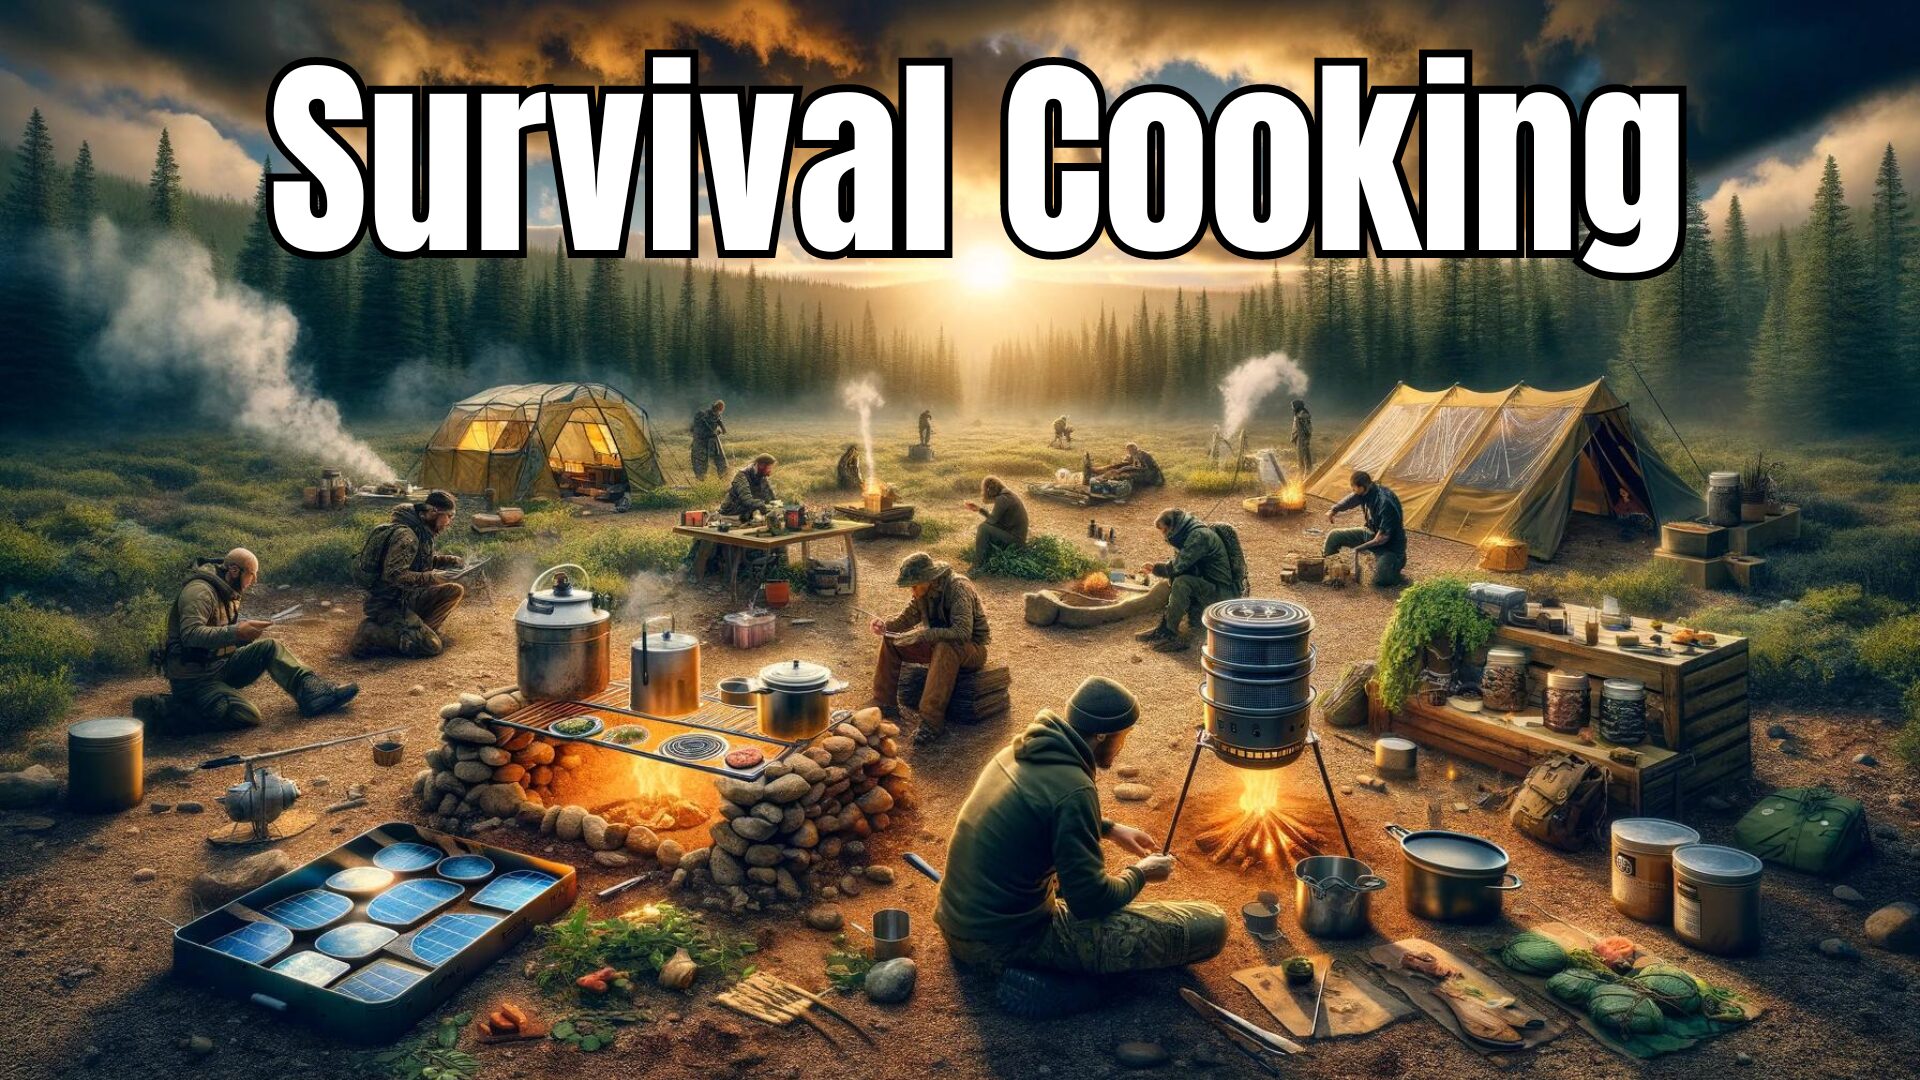 Survival Cooking